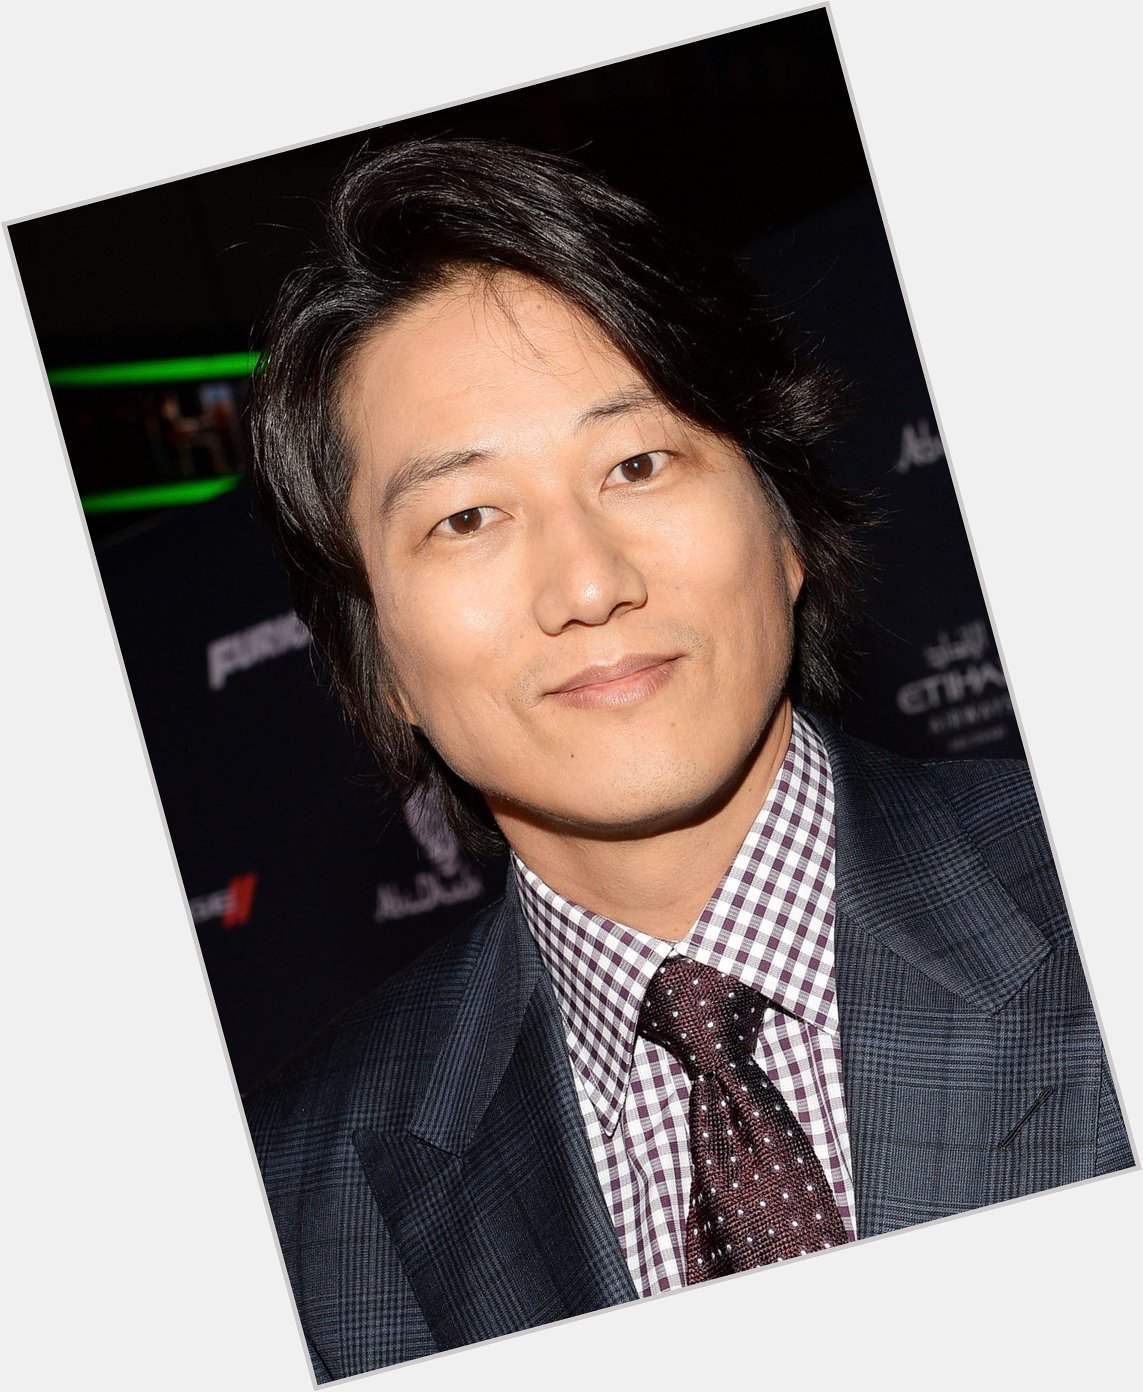 Happy 50th Birthday Sung Kang - Han from the Fast & Furious films 